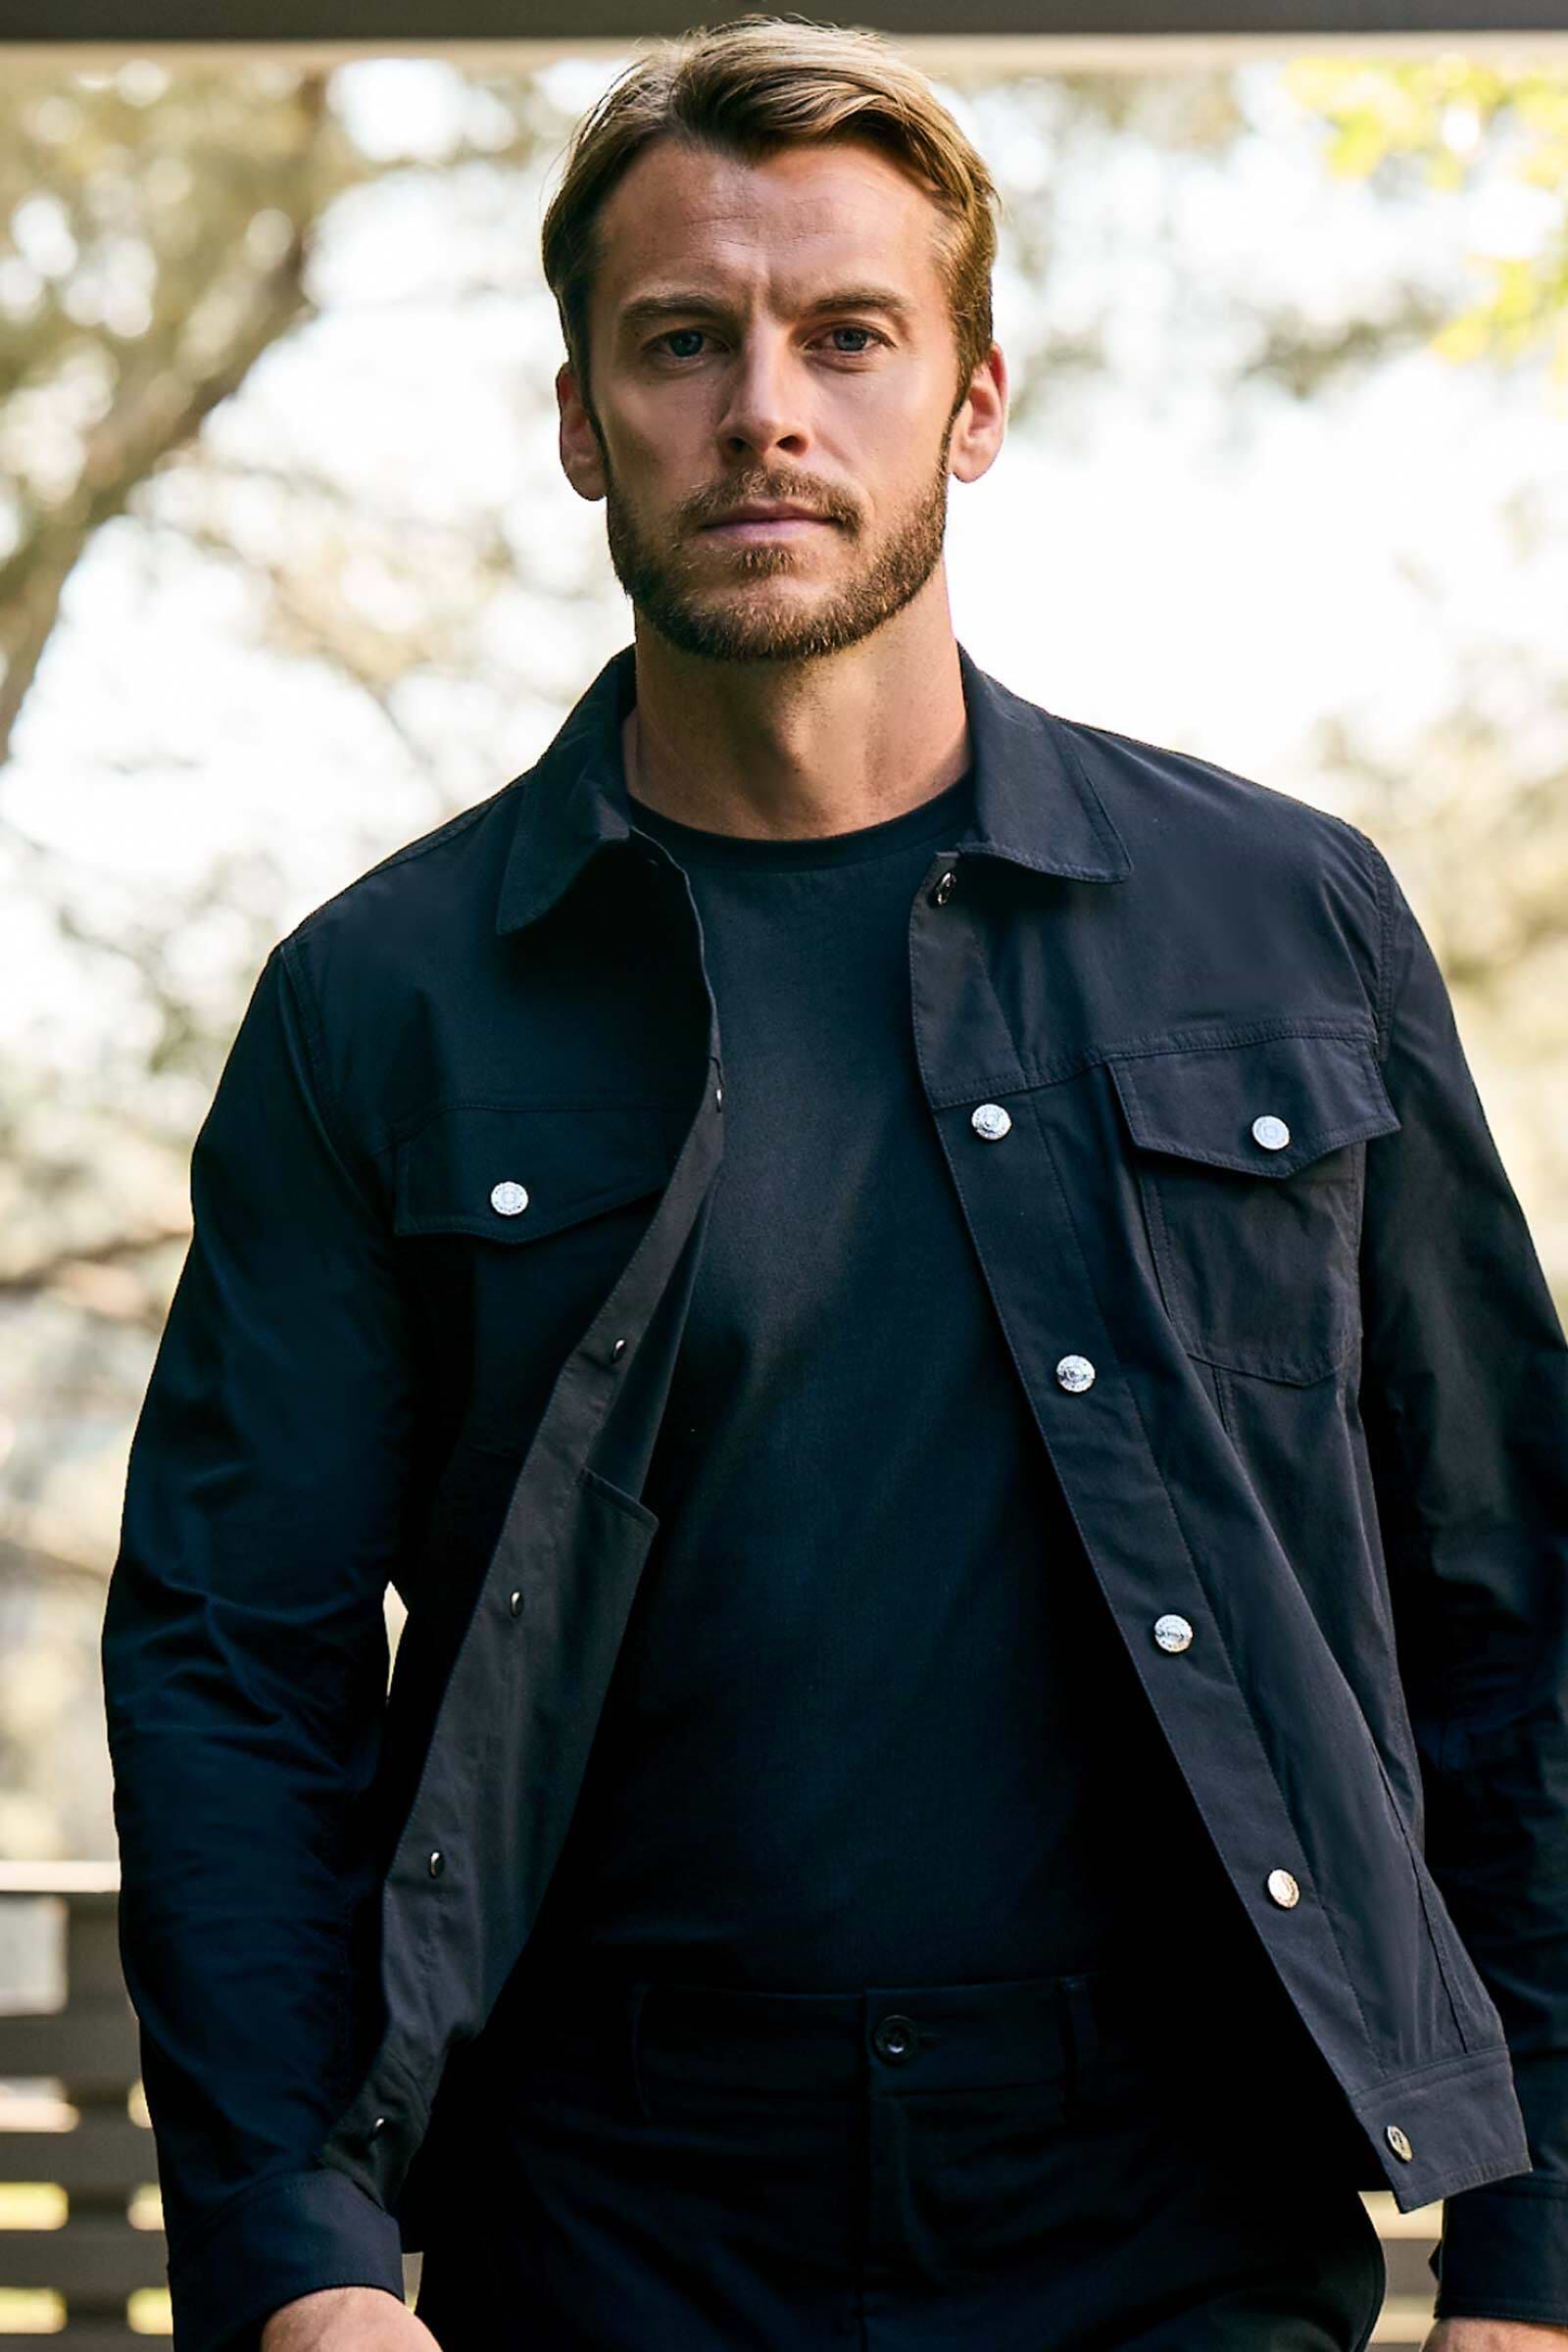 The Best Travel Top. Lifestyle Image of Man Showing the Front Profile of a Men's Scott Top in Black.